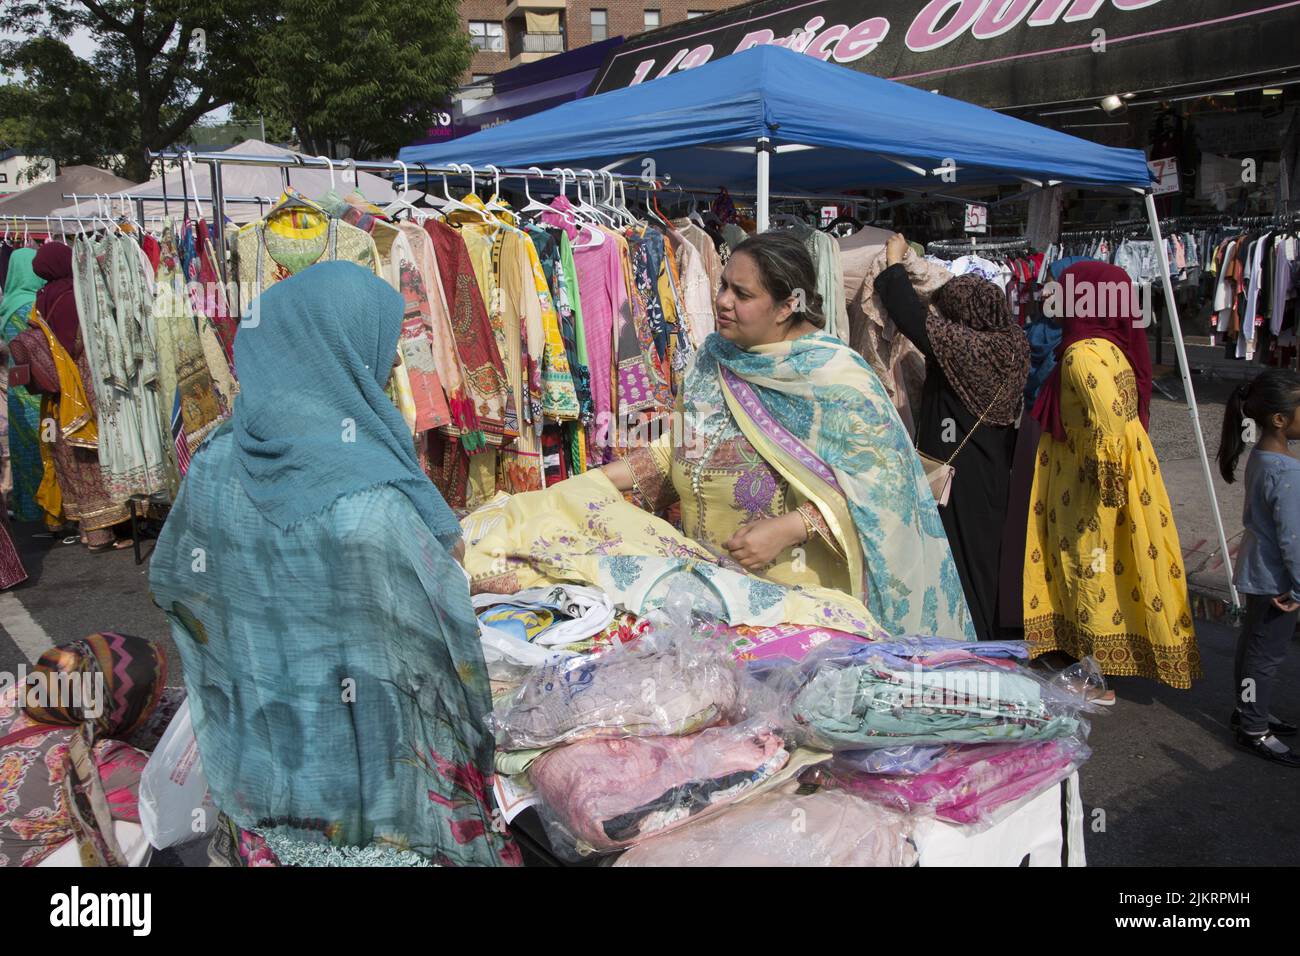 Woman sells colorful dresses and material at a Bangladeshi Street Fair on Church Avenue in the Kensington neighborhood of Brooklyn, New York. Stock Photo